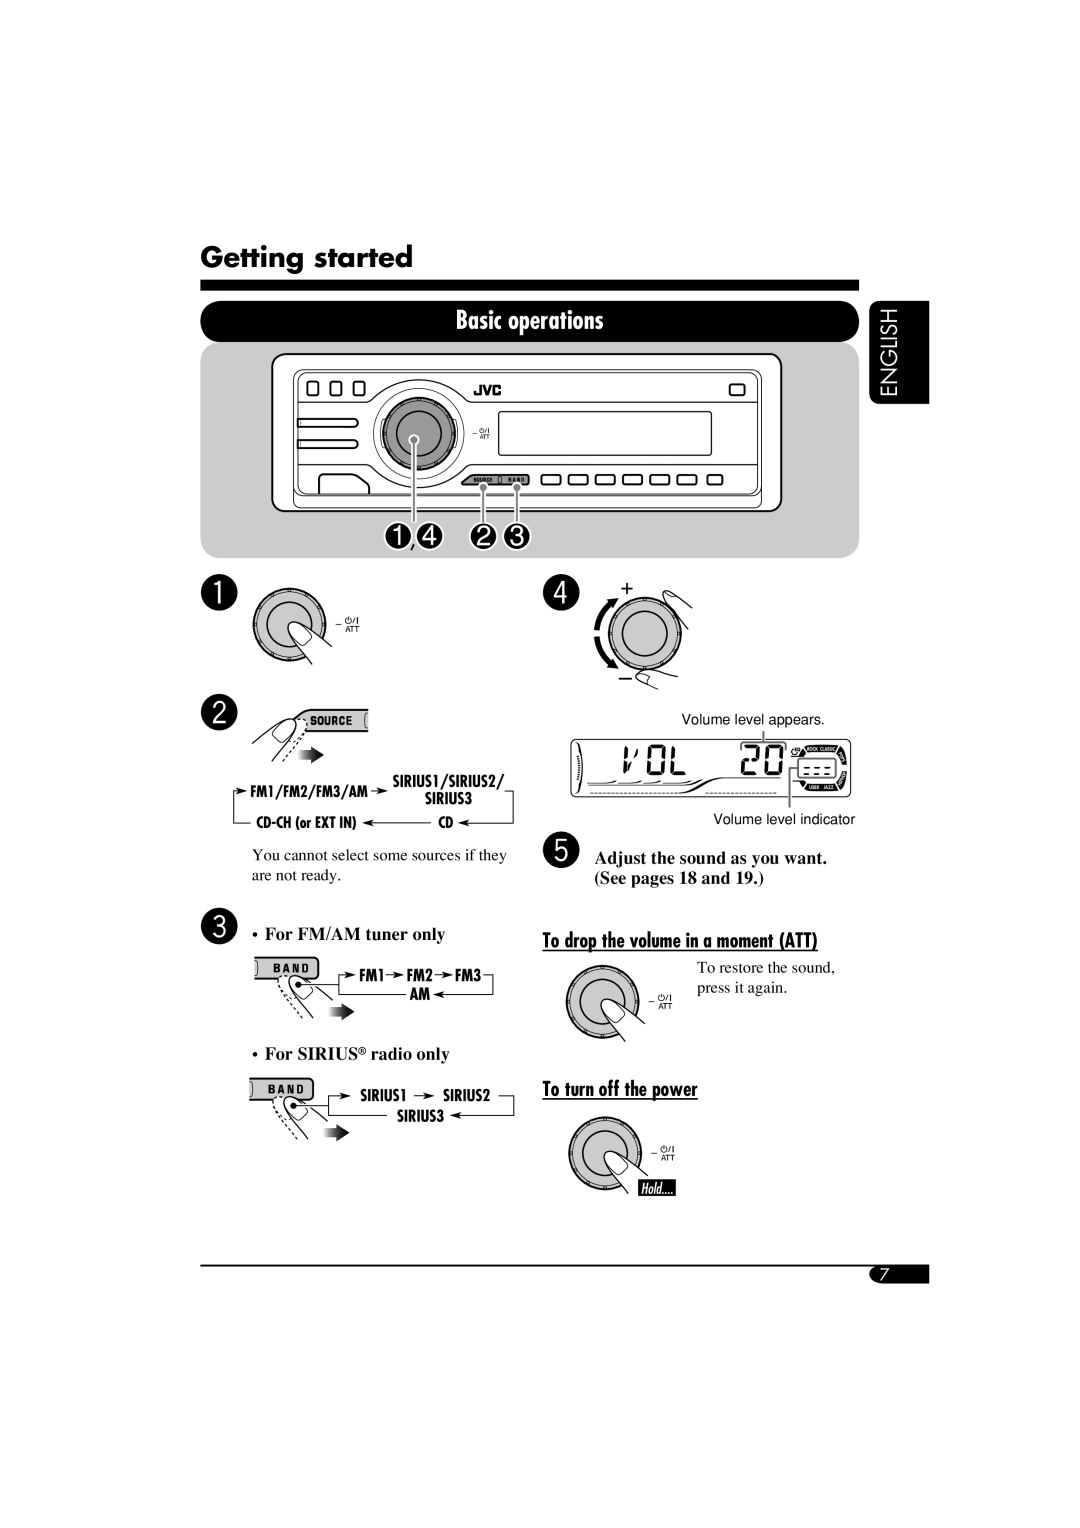 JVC KD-S51 manual Getting started, Basic operations, To drop the volume in a moment ATT, To turn off the power, English 